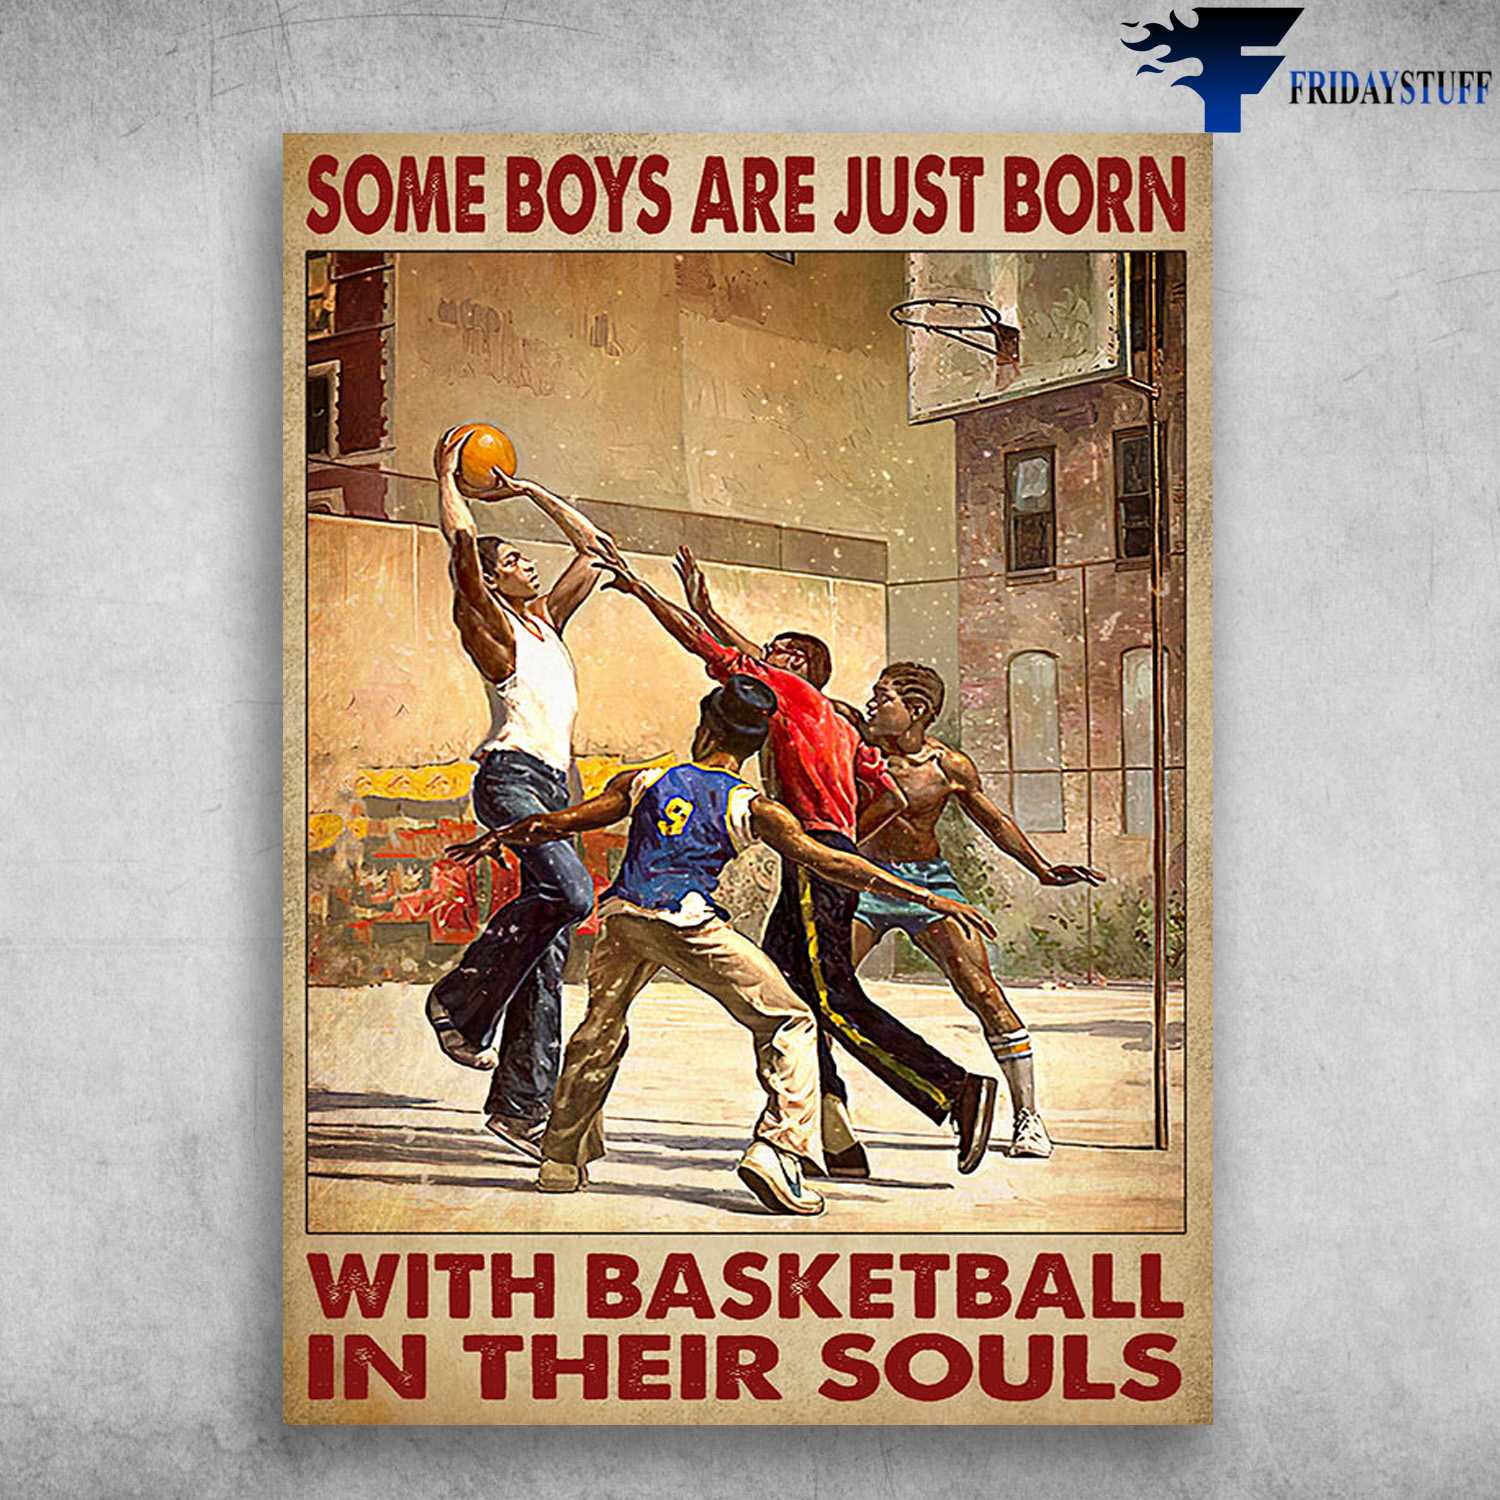 Basketball Player - Some Boys Are Just Born, With Basketball, In Their Souls, Black Man Basketball